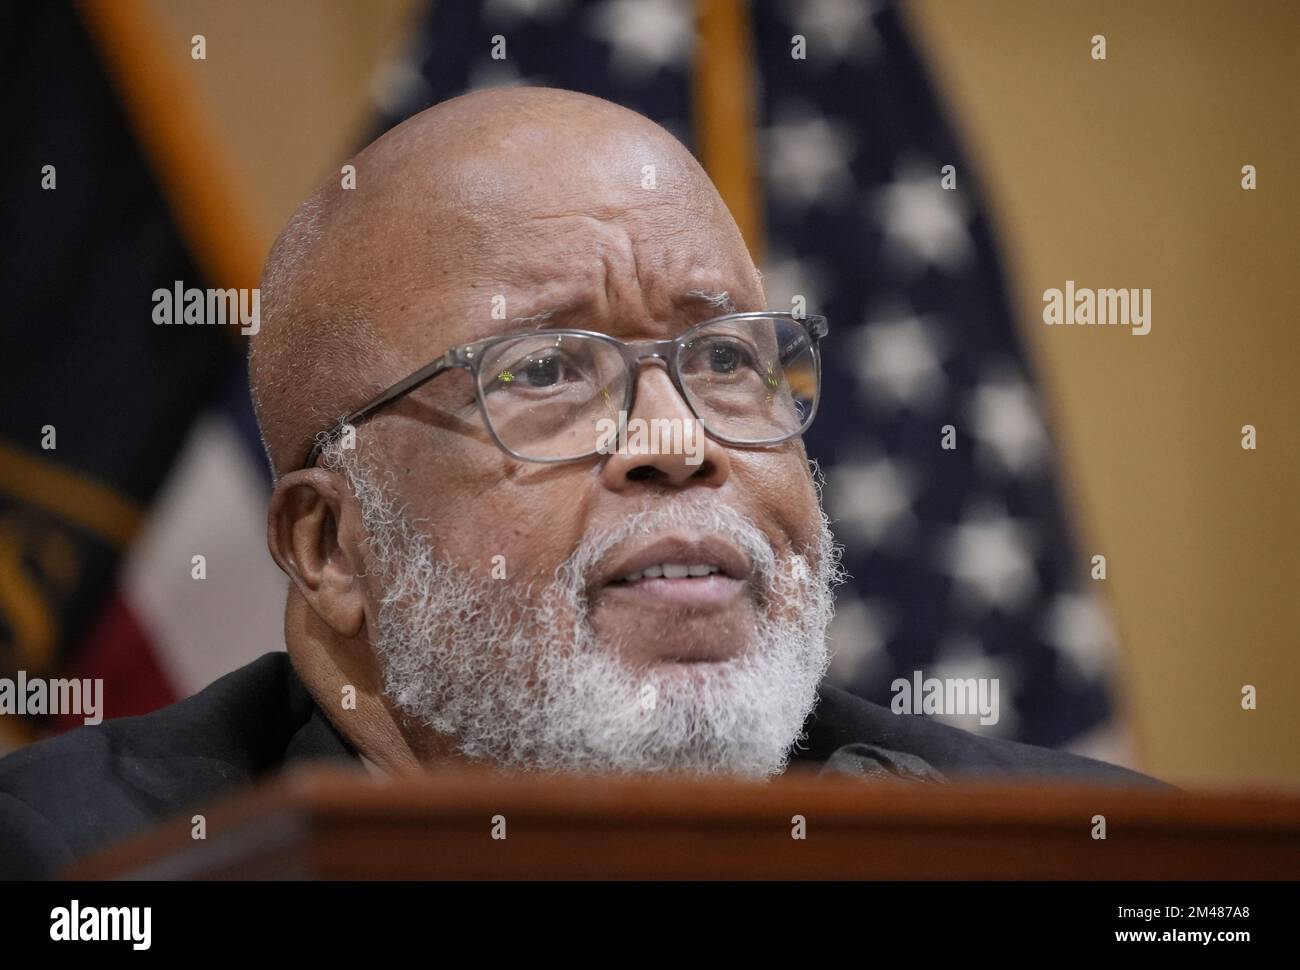 Washington, United States. 19th Dec, 2022. Committee Chairman Bennie Thompson, D-MS, makes an opening statement as the House Select Committee investigating the Jan. 6 attack on the U.S. Capitol holds its final public hearing to discuss the findings of an 18-month investigation, on Capitol Hill in Washington, DC on Monday, December 19, 2022. Photo by Ken Cedeno/UPI Credit: UPI/Alamy Live News Stock Photo